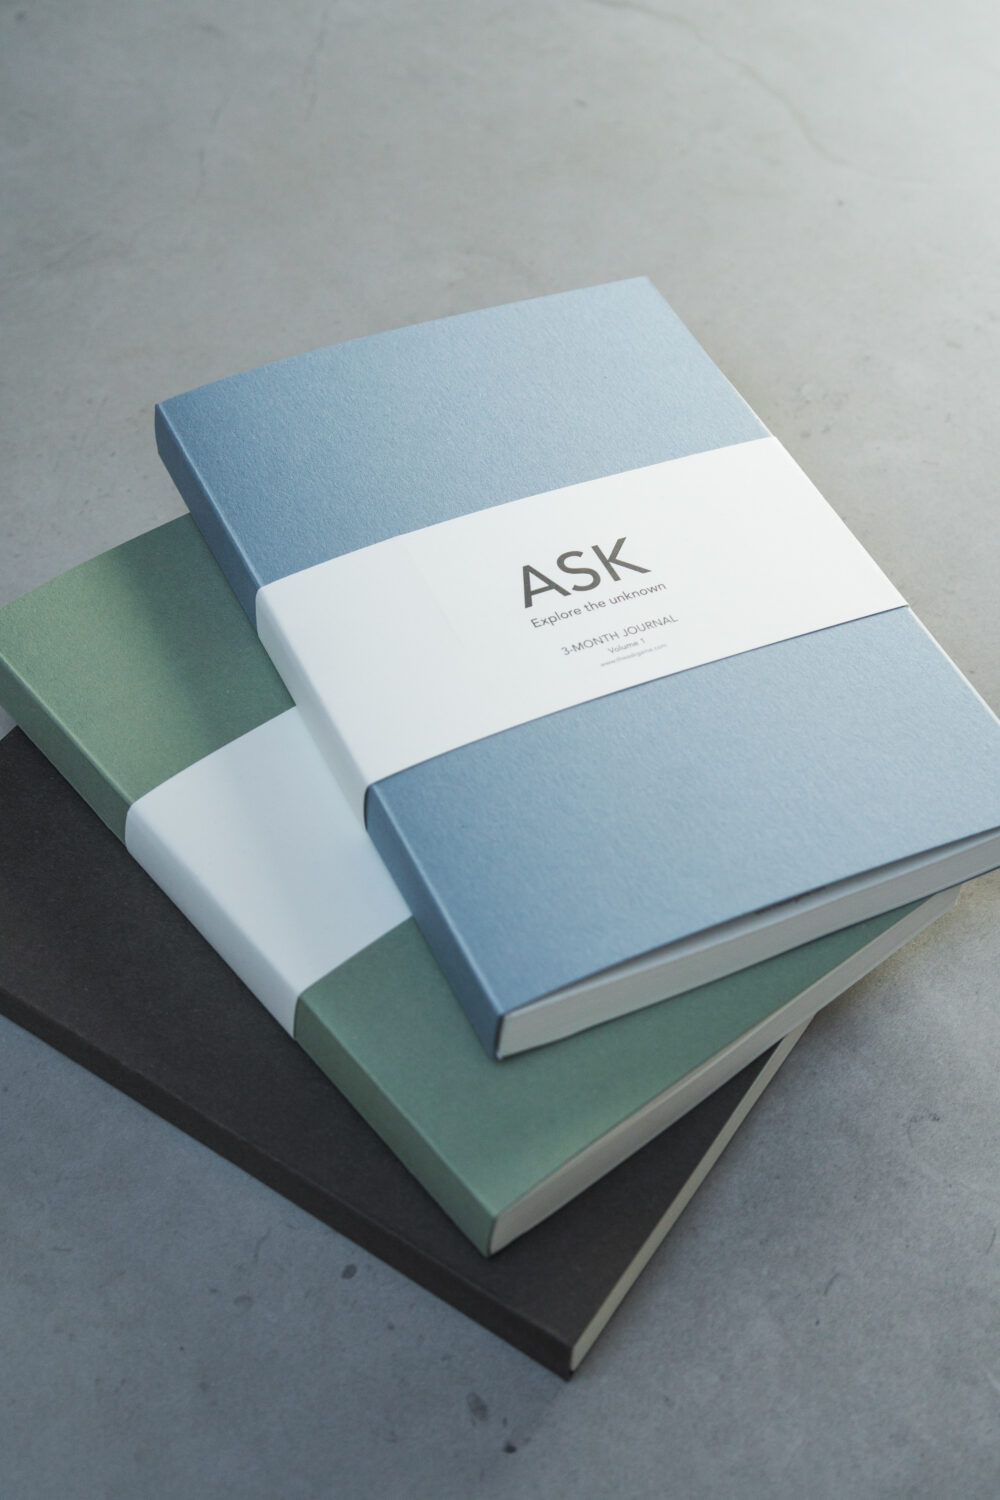 ask journal